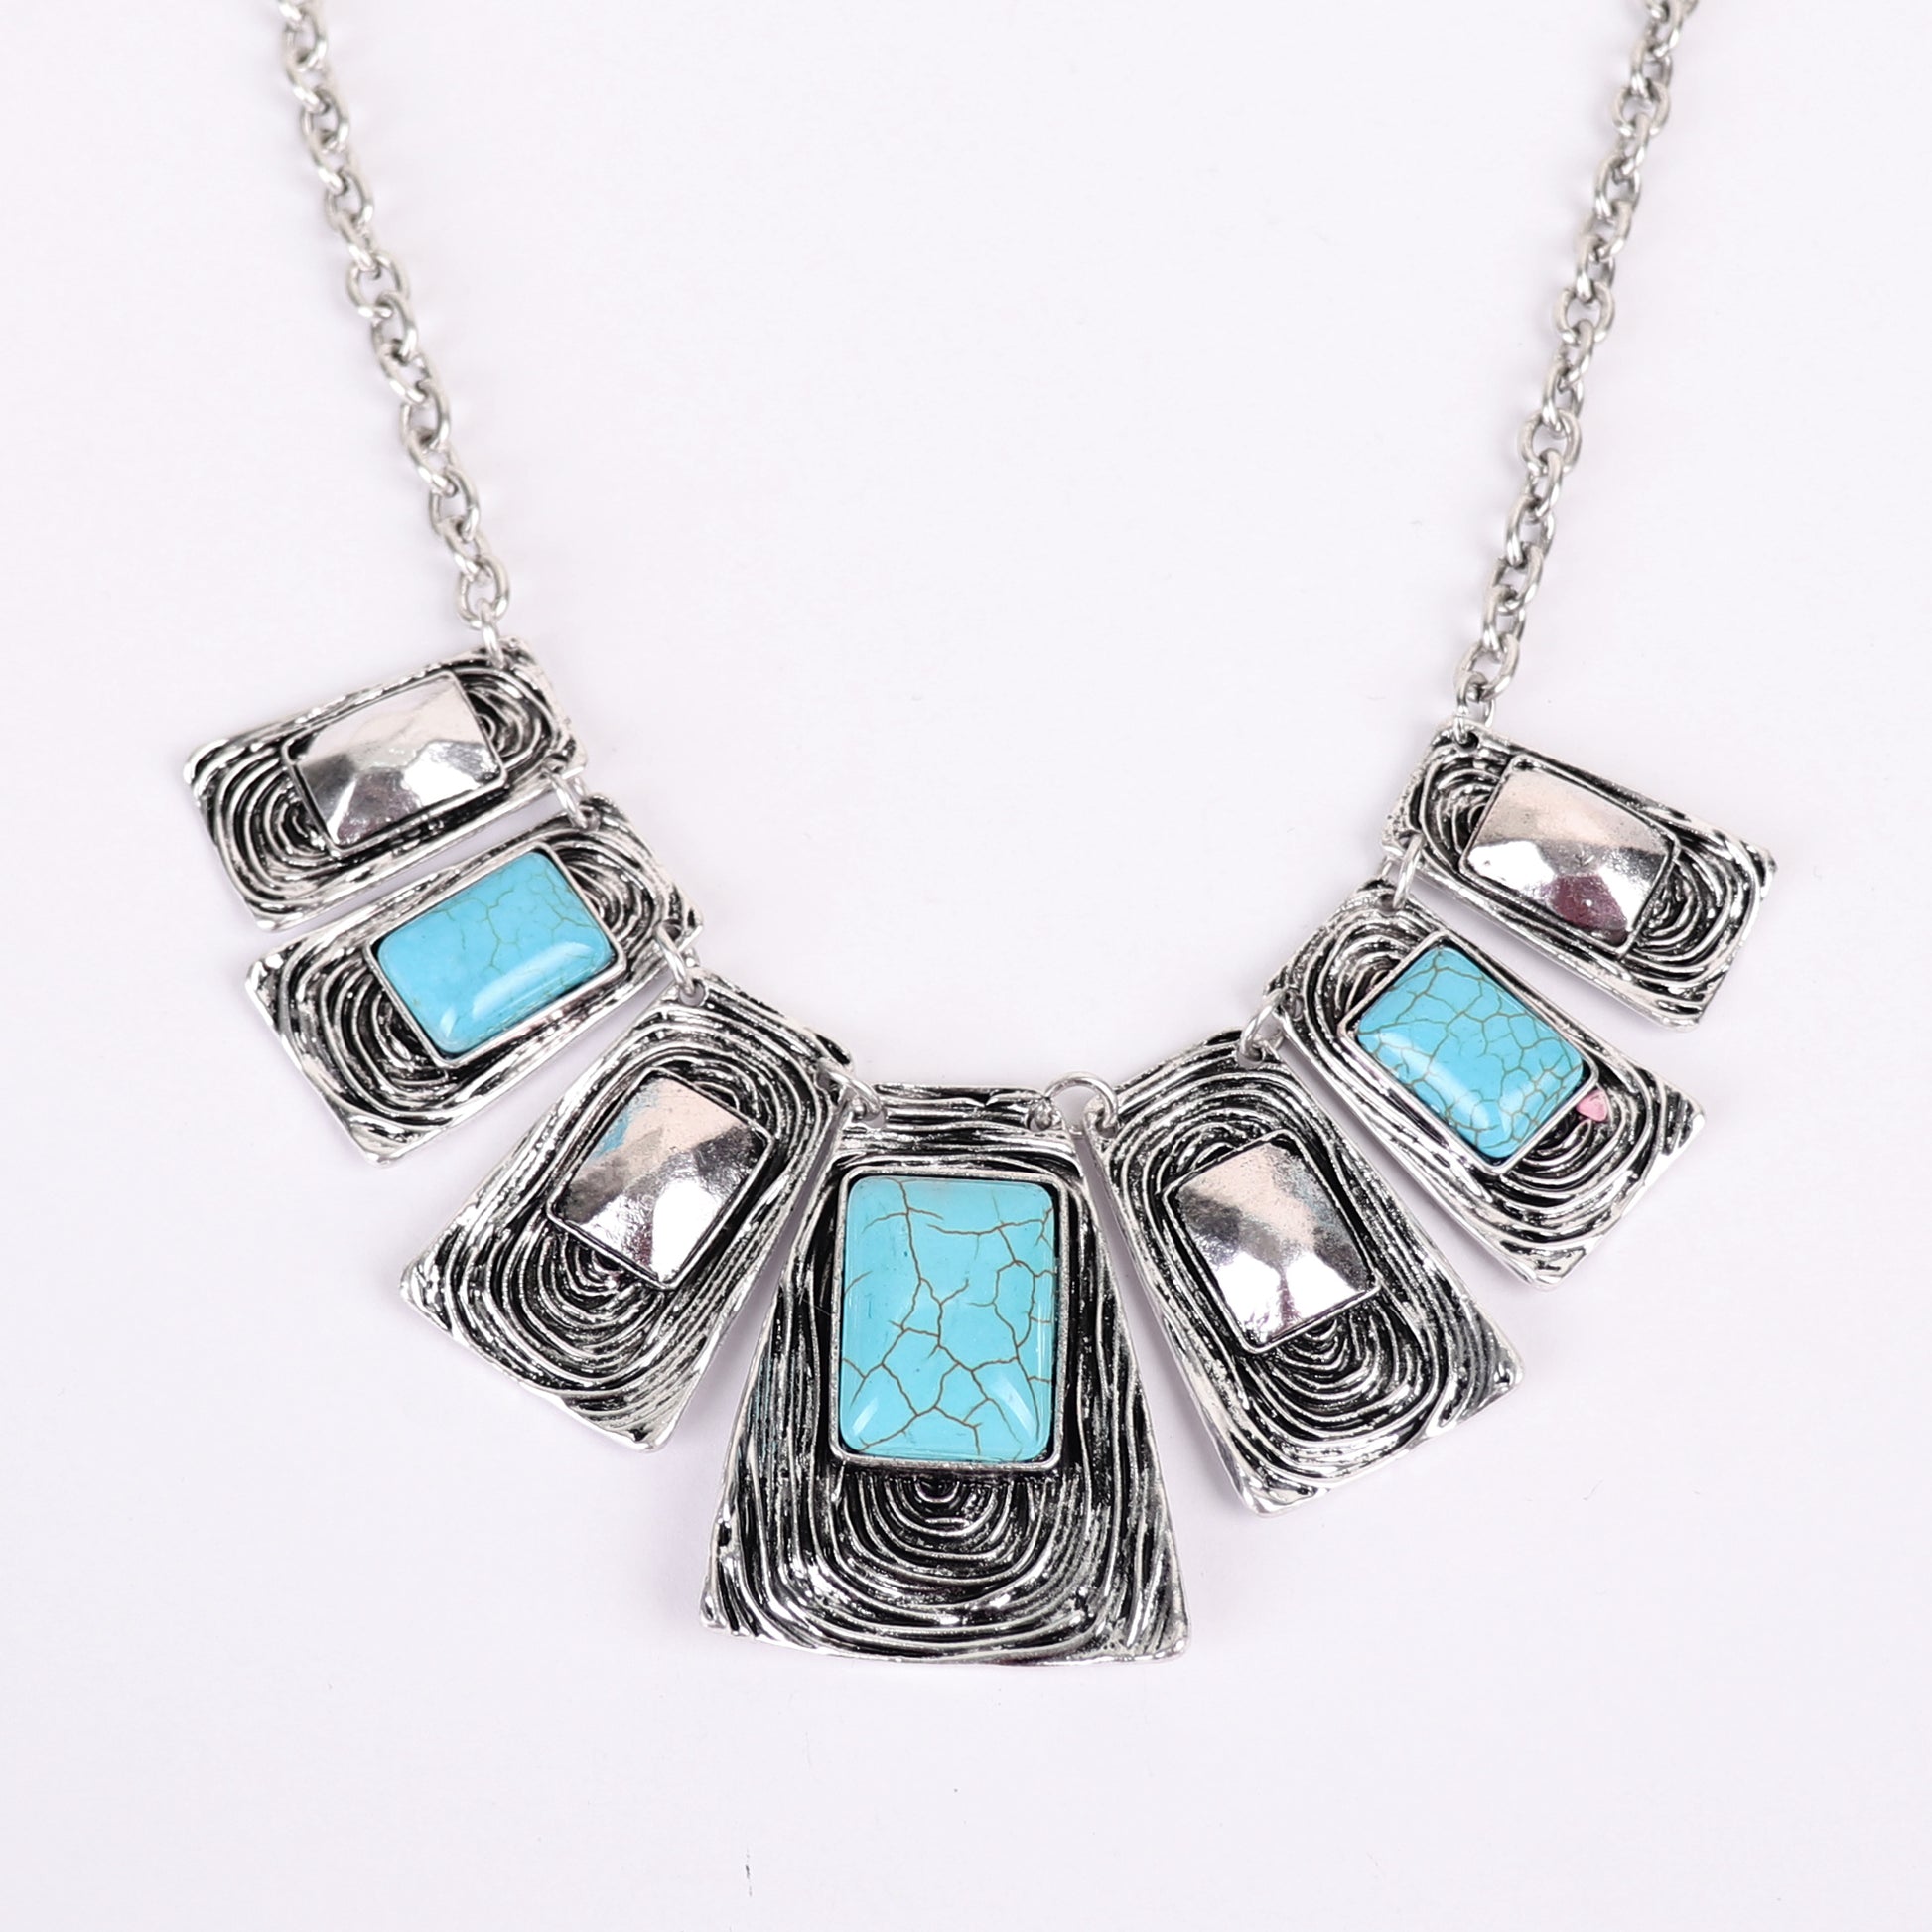 Necklace Set,High Fashion Metal Necklace Set in Blue - Cippele Multi Store